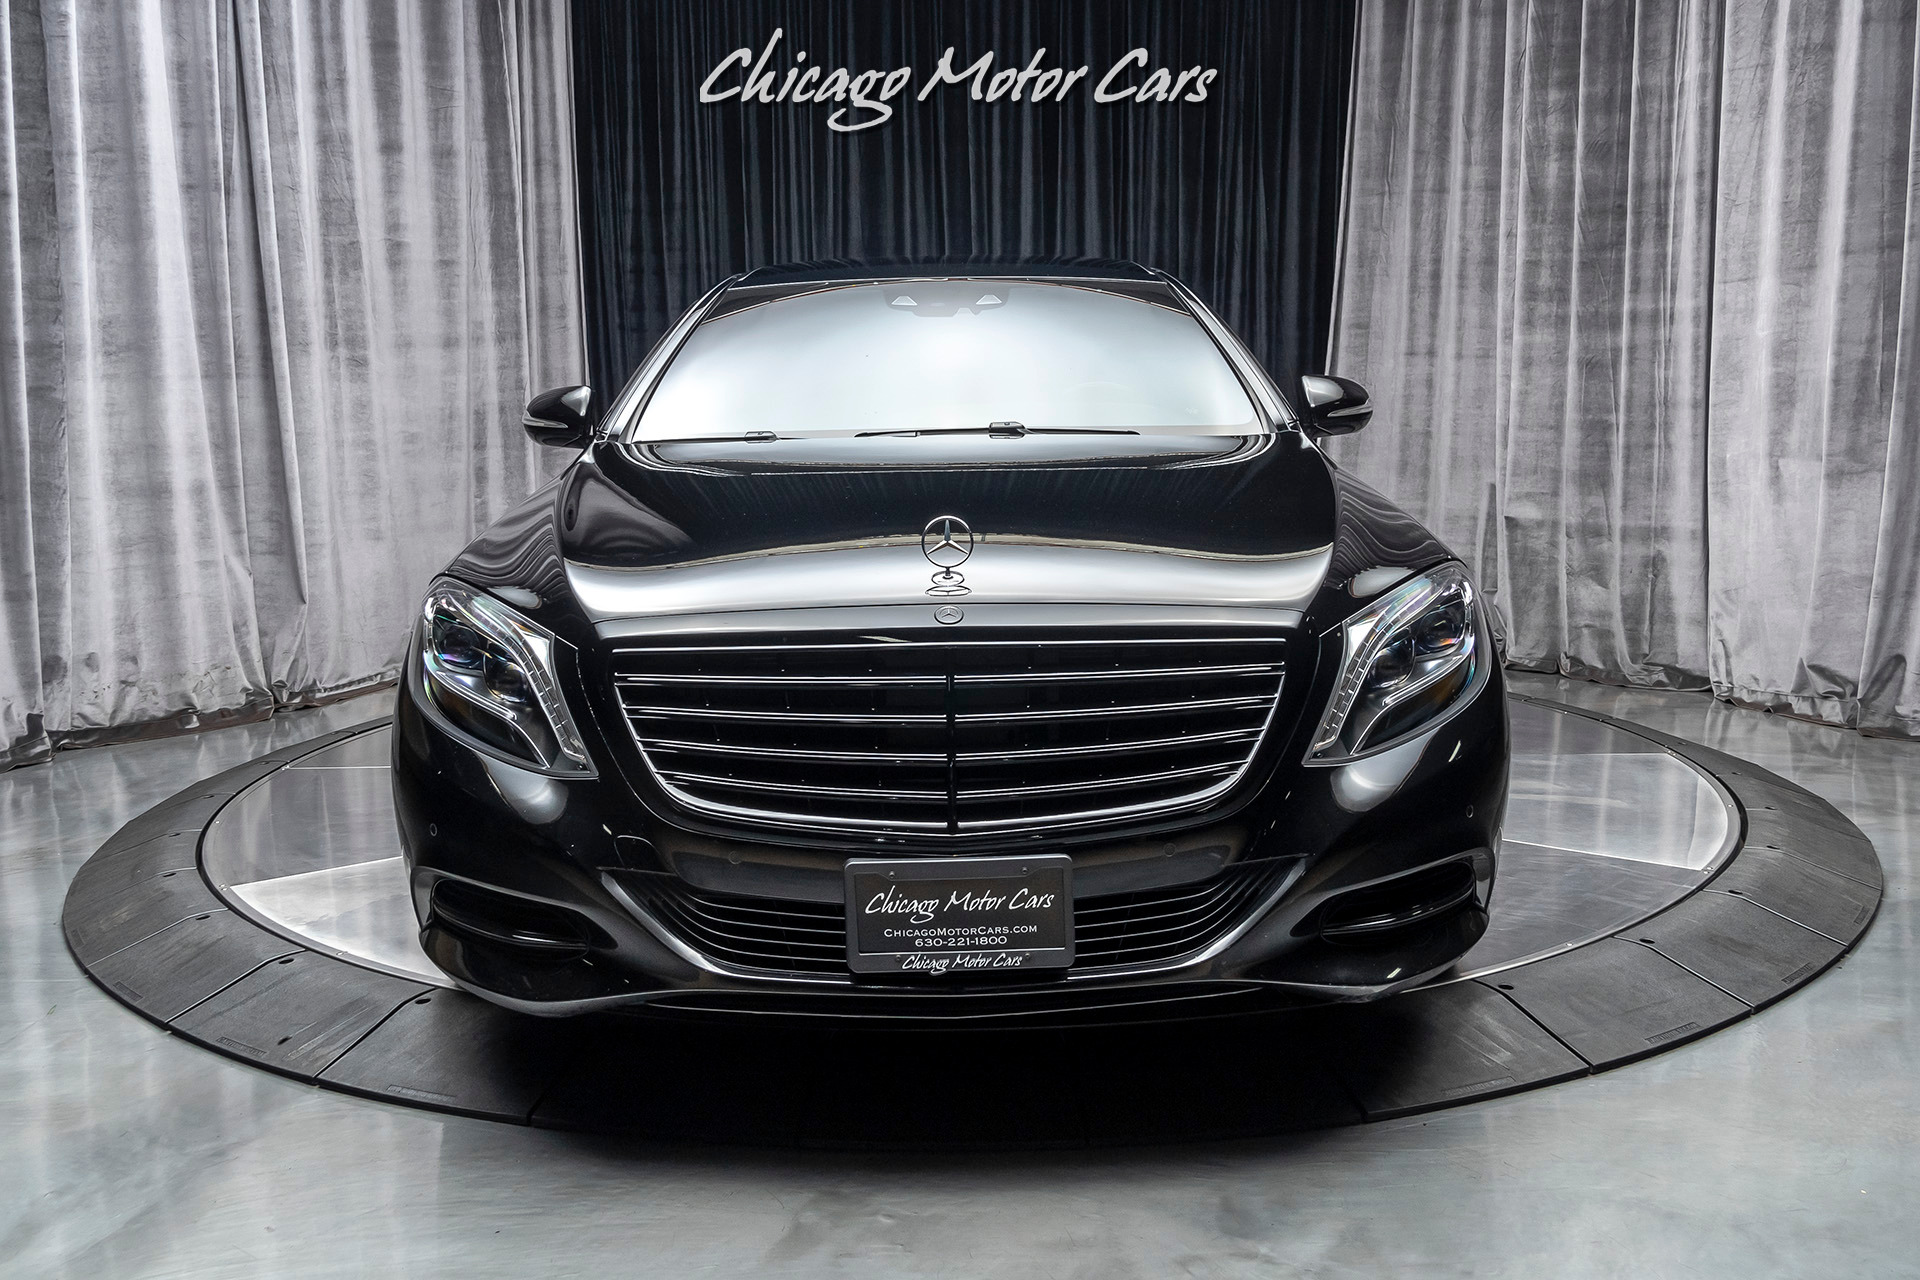 Used 2015 Mercedes Benz S Class S 550 103k Msrp 22 Black Forgiato Wheels For Sale Special